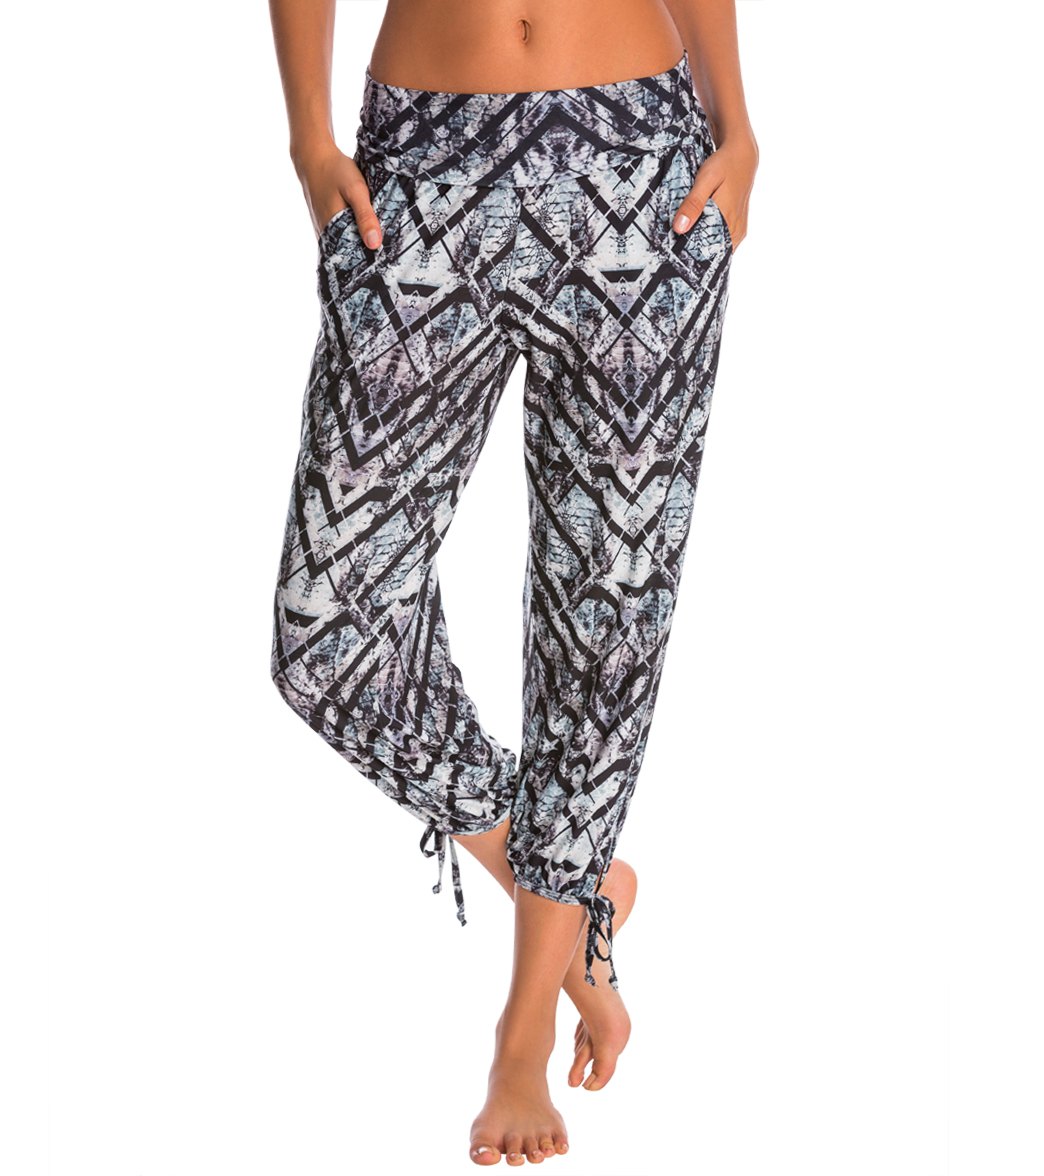 Onzie Gypsy Yoga Pant at SwimOutlet.com 